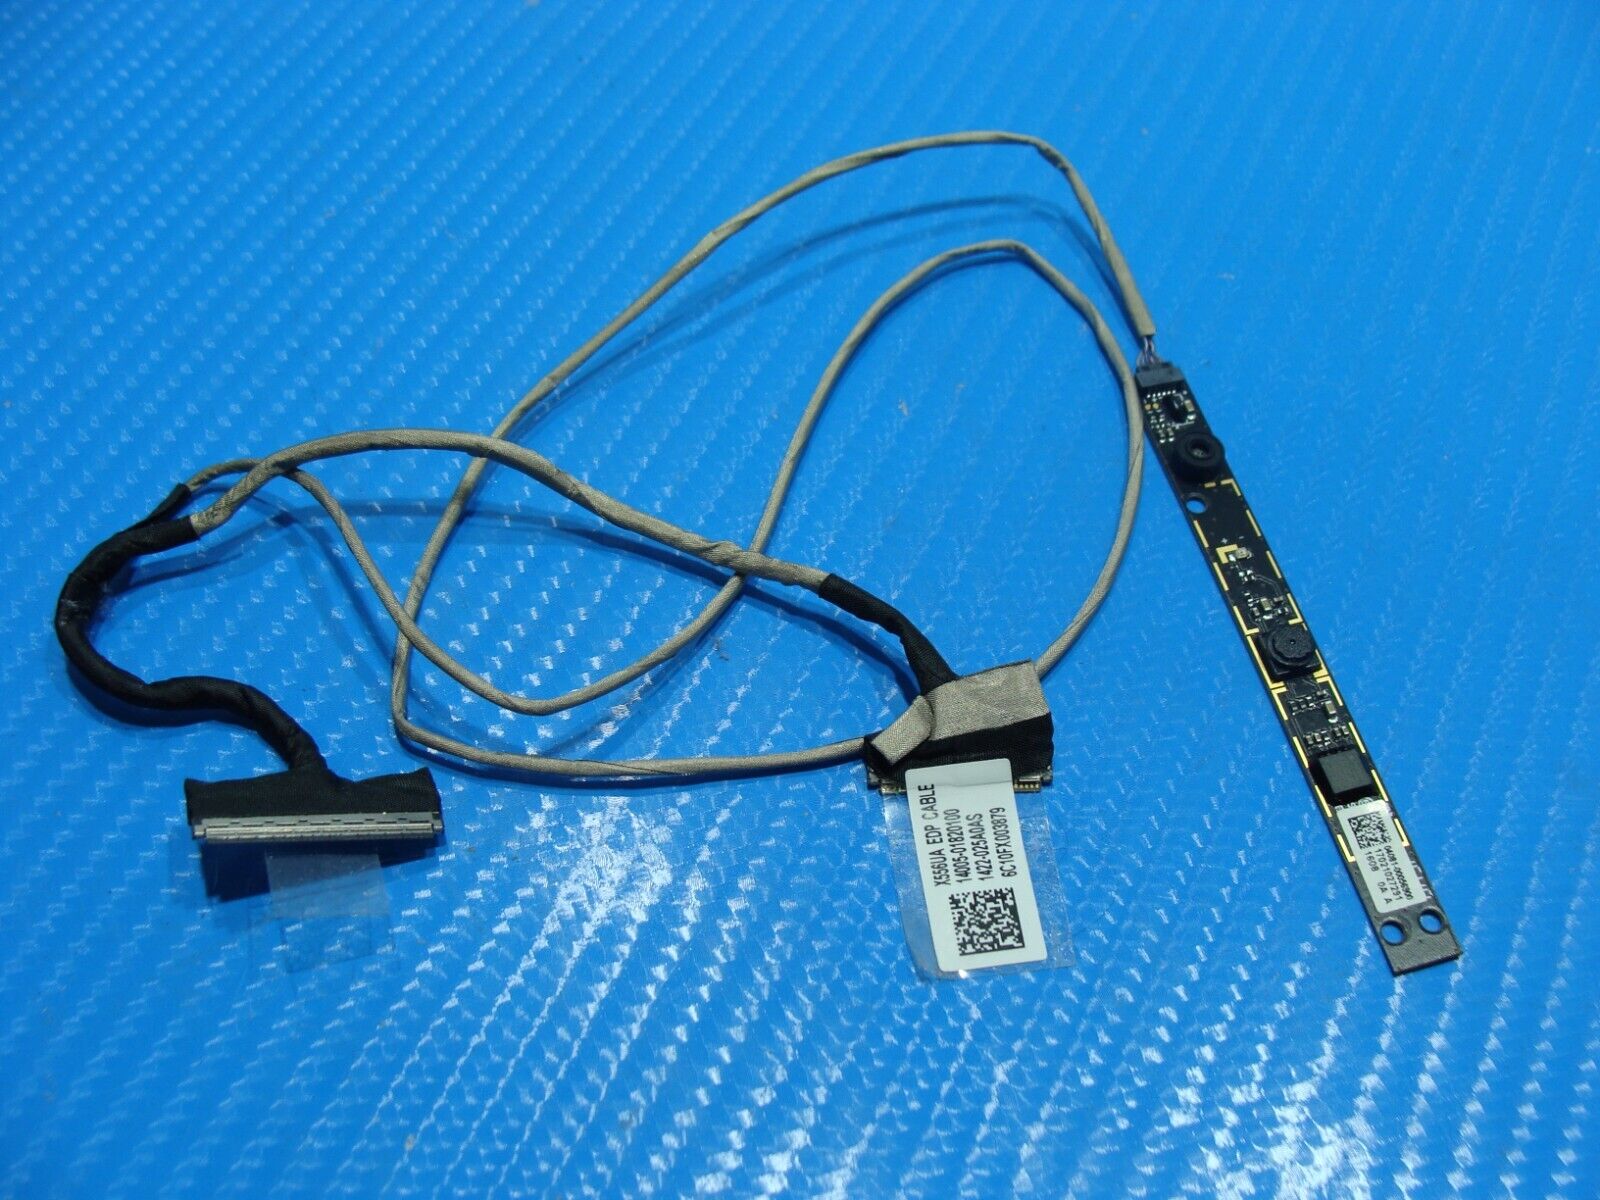 Asus 15.6” X556UQ-NH71 Genuine Laptop LCD Video Cable w/WebCam 14005-01820100